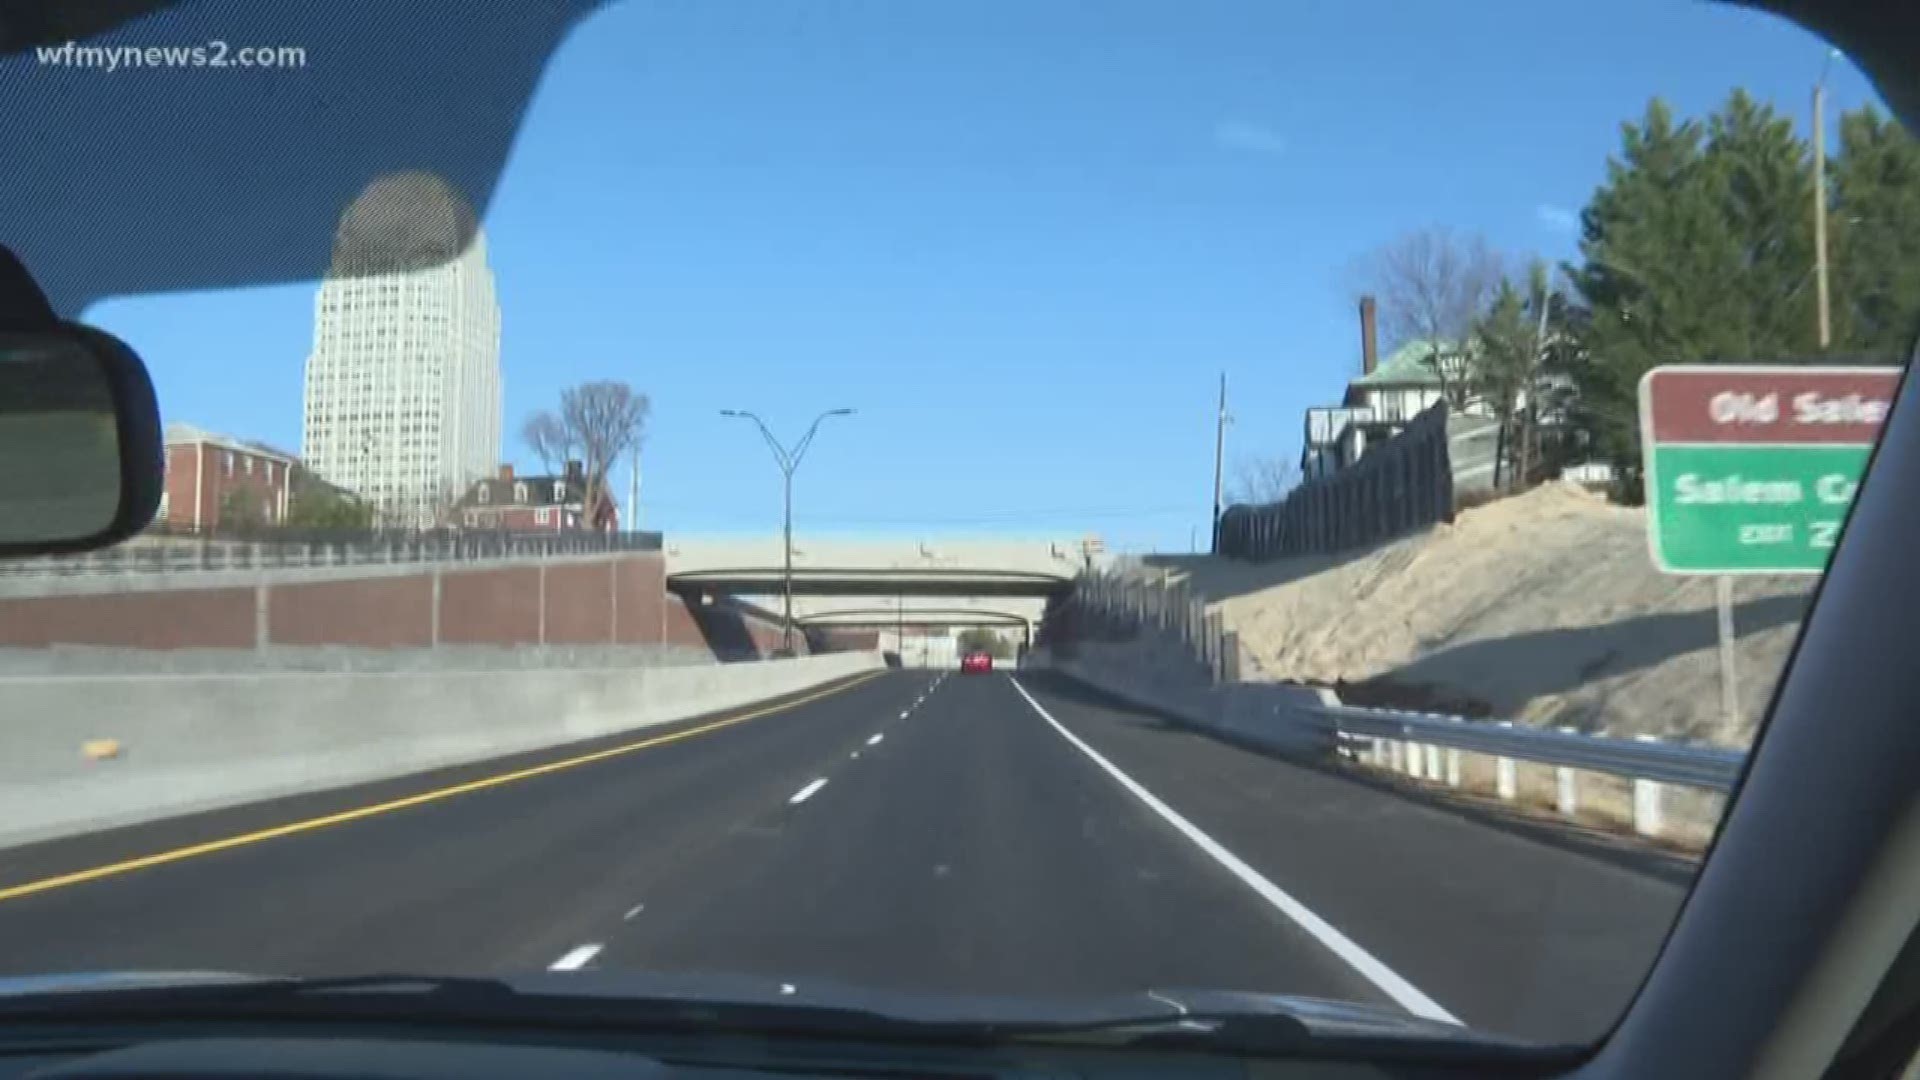 The Salem Parkway is open for business, as traffic begins to flow before the workweek.